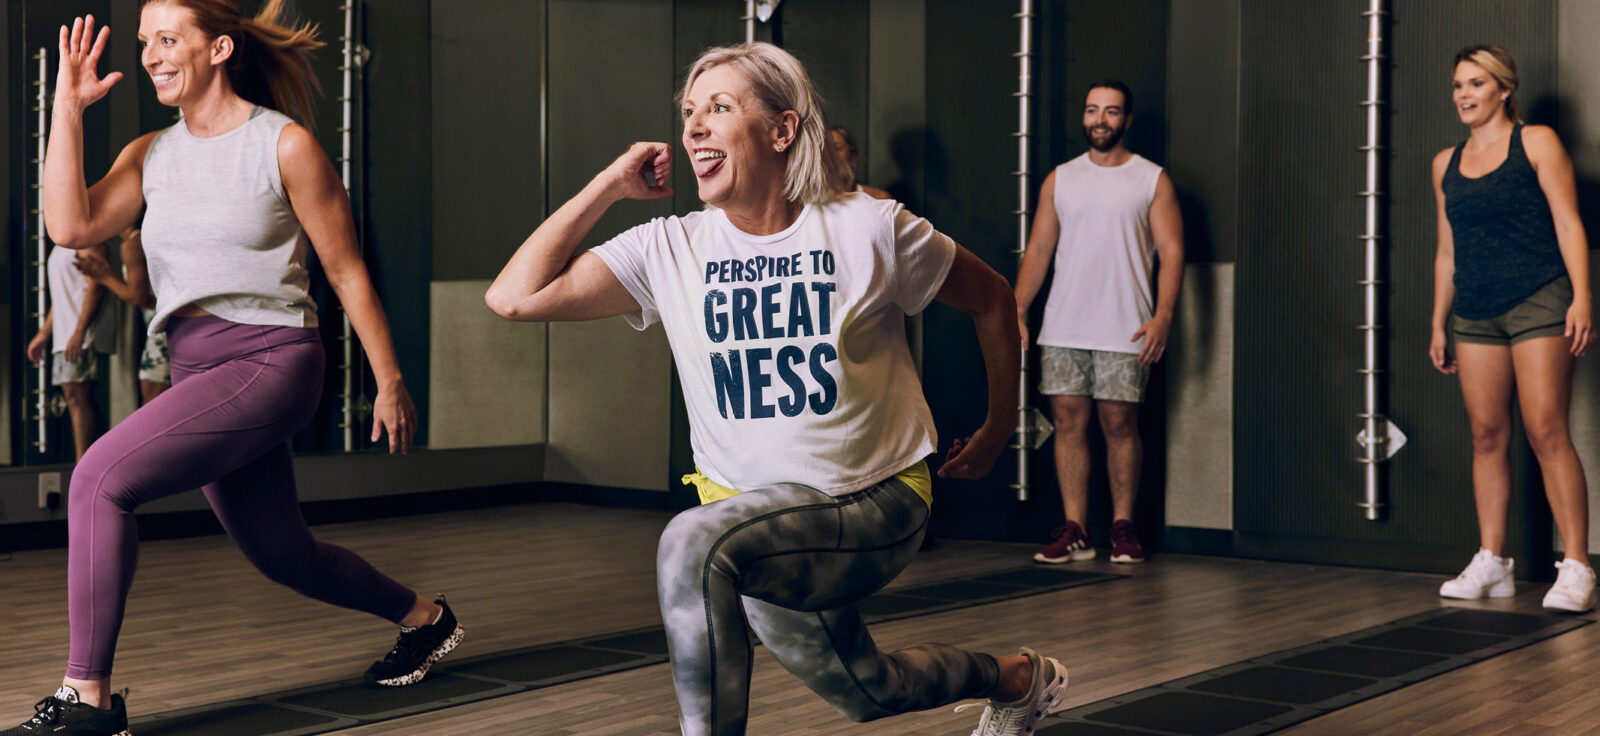 These Next-Level Luxury Fitness Clubs Are Changing Gym Culture in